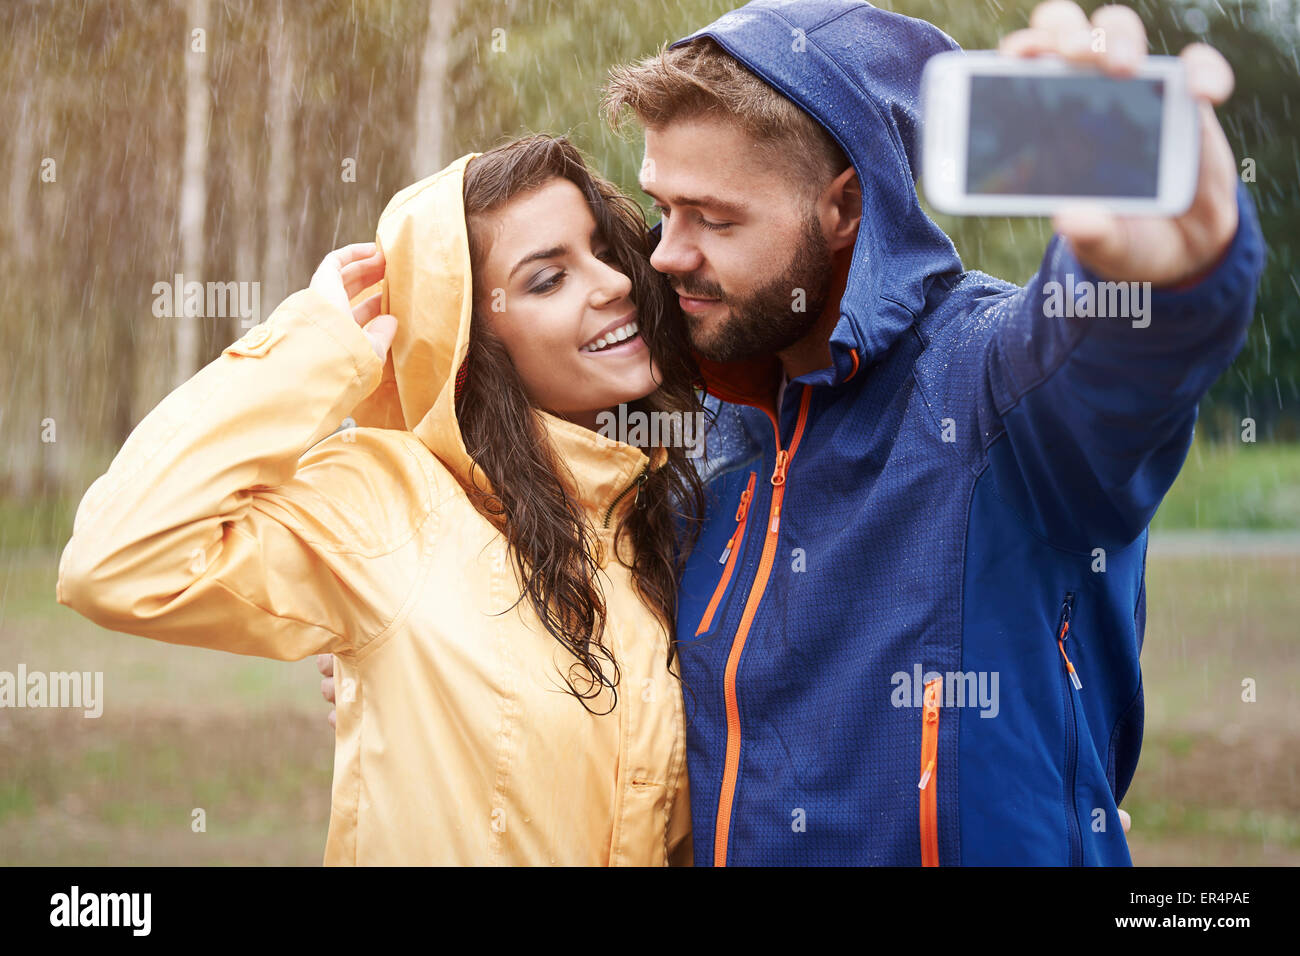 I want to have selfie with you. Debica, Poland Stock Photo